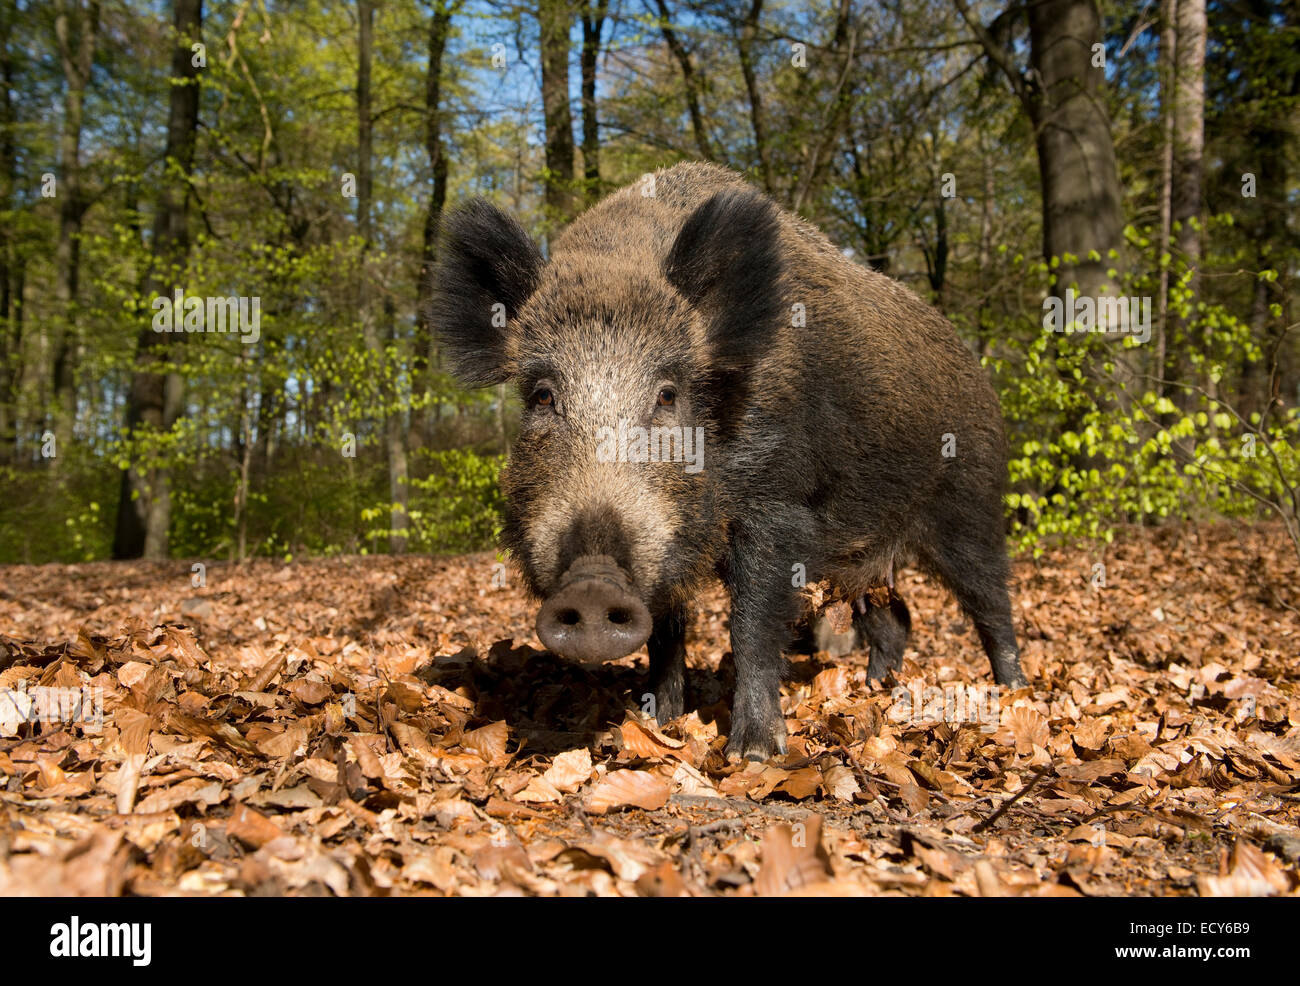 Wild Boar (Sus scrofa), Sow in a spring forest, captive, North Rhine-Westphalia, Germany Stock Photo